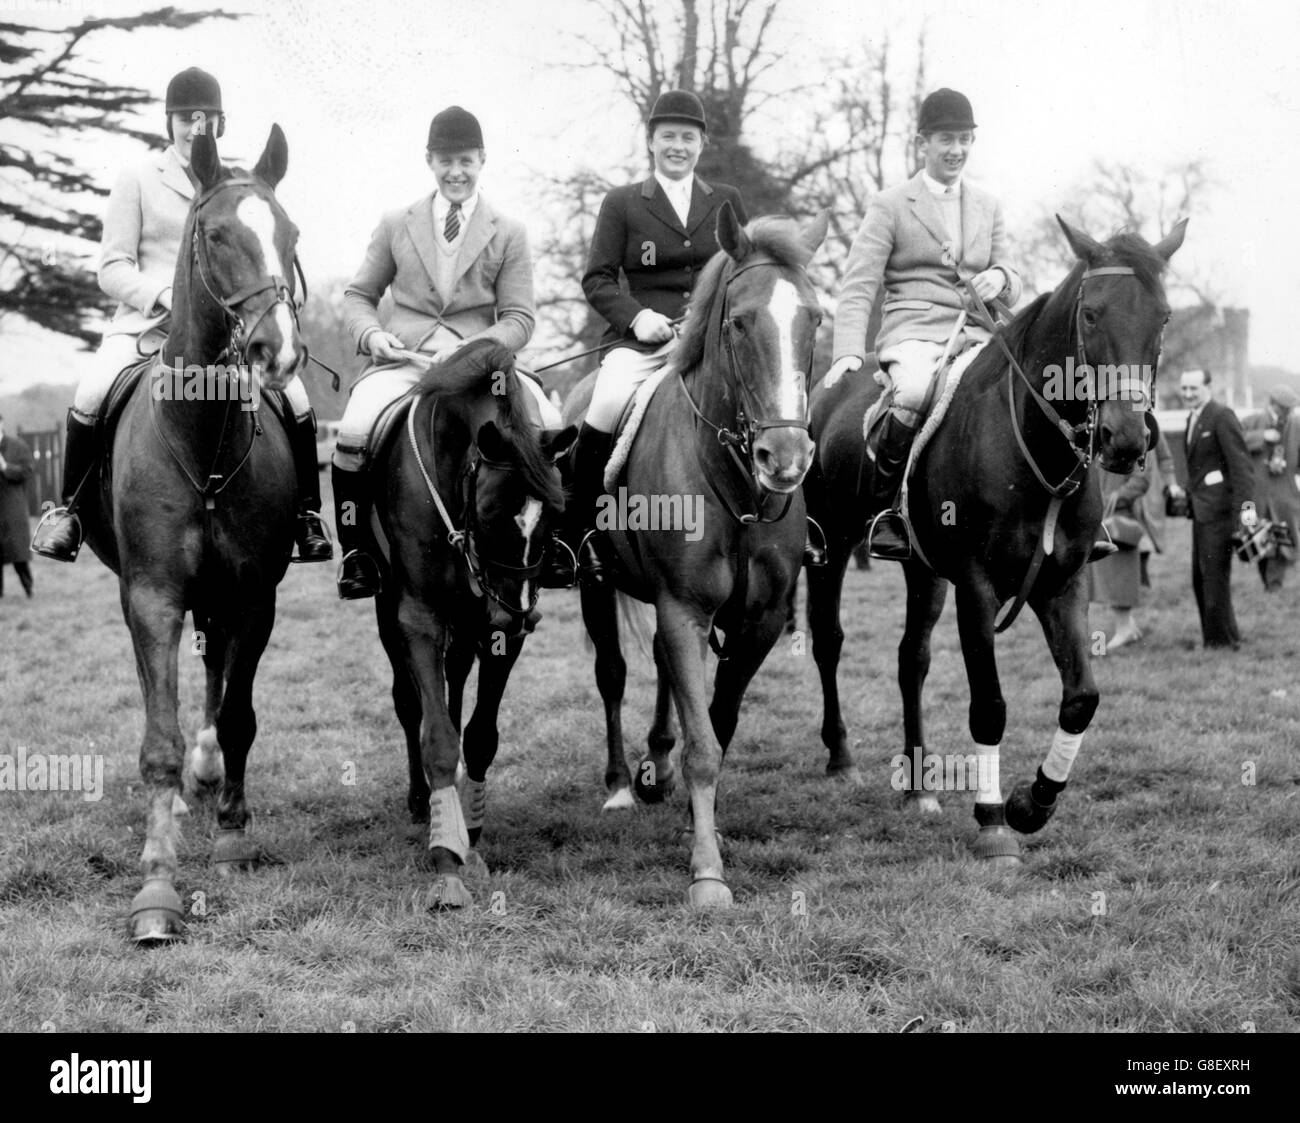 Pictured at Arundel Castle, Sussex, are four of the seven riders who have accepted invitations from the British Show Jumping Association to go into training for the equestrian events in the Olympic Games taking place in Rome later in the year. (l-r) Miss Ann Townsend, 19, of South Farm, Southrop, Lechlade, Gloucestershire, on 'Bandit IV', David Barker, 24, of Bilbrough Grange, Yorkshire, on 'Franco', Miss Pat Smythe, 31, of Stroud, Gloucester, on 'Flanagan', and David Broome, 19, of Chepstow, Monmouthshire, on 'Wildfire III'. Stock Photo